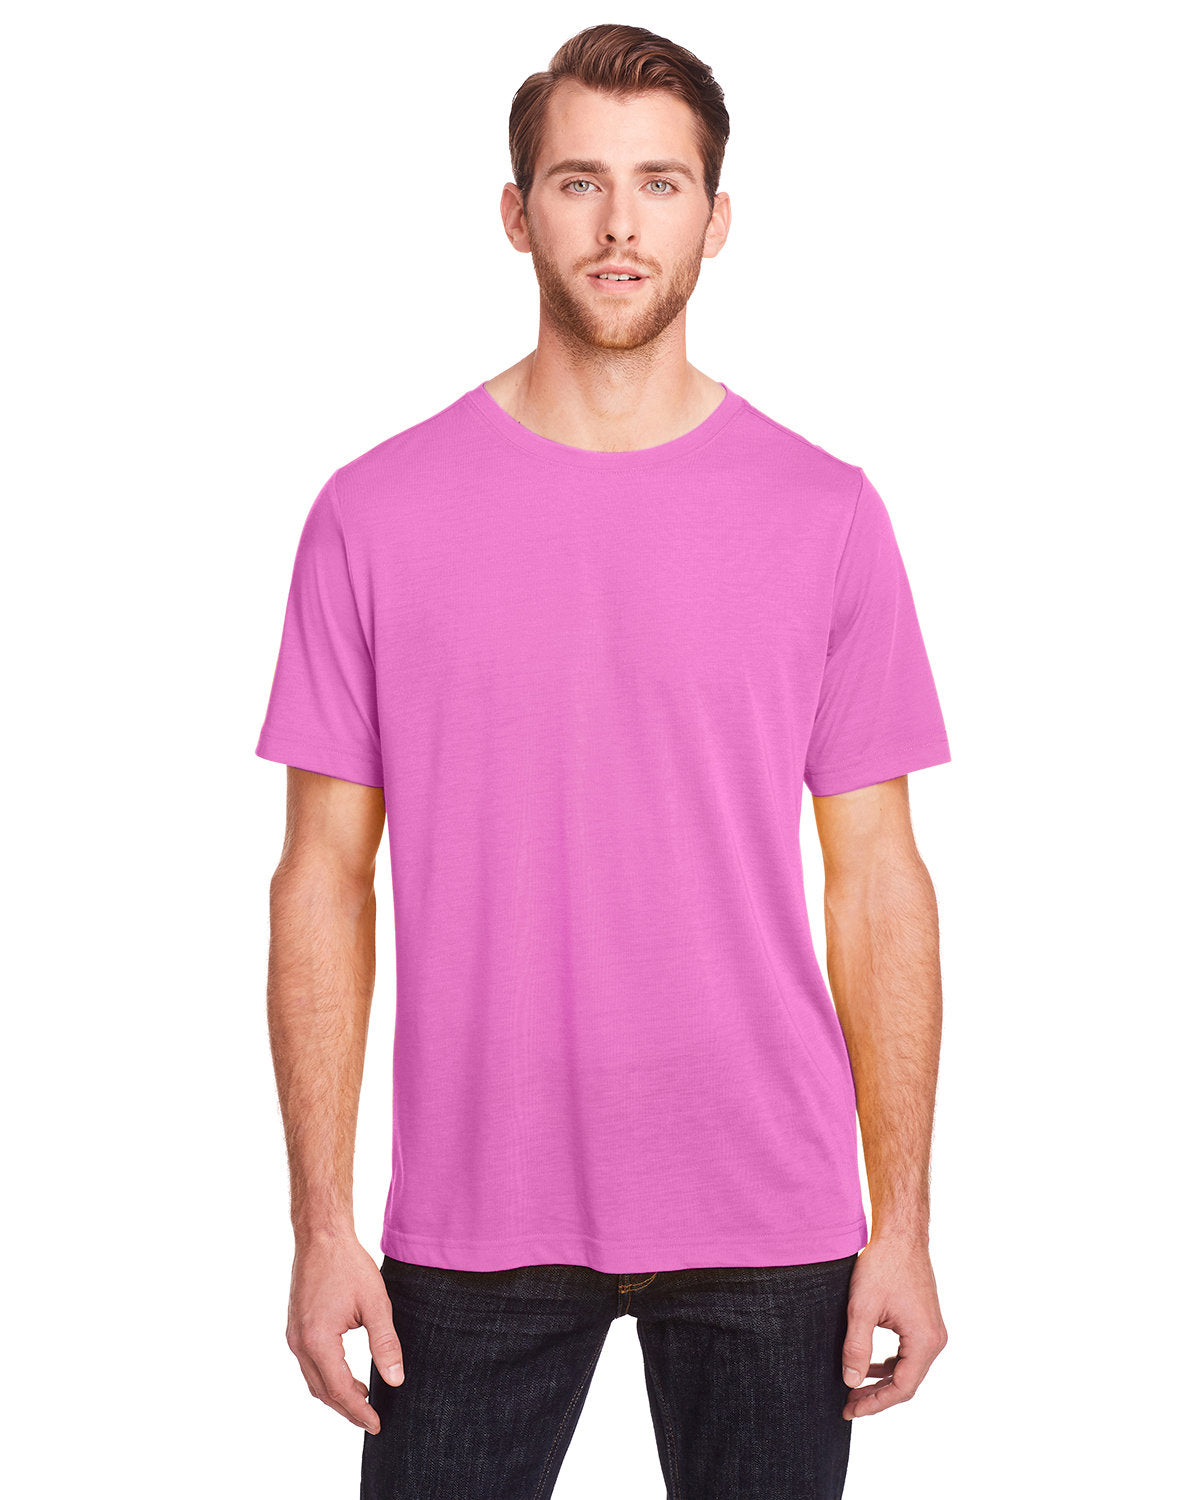 CE111-CORE365-MP-CHARITYPINK-5XL